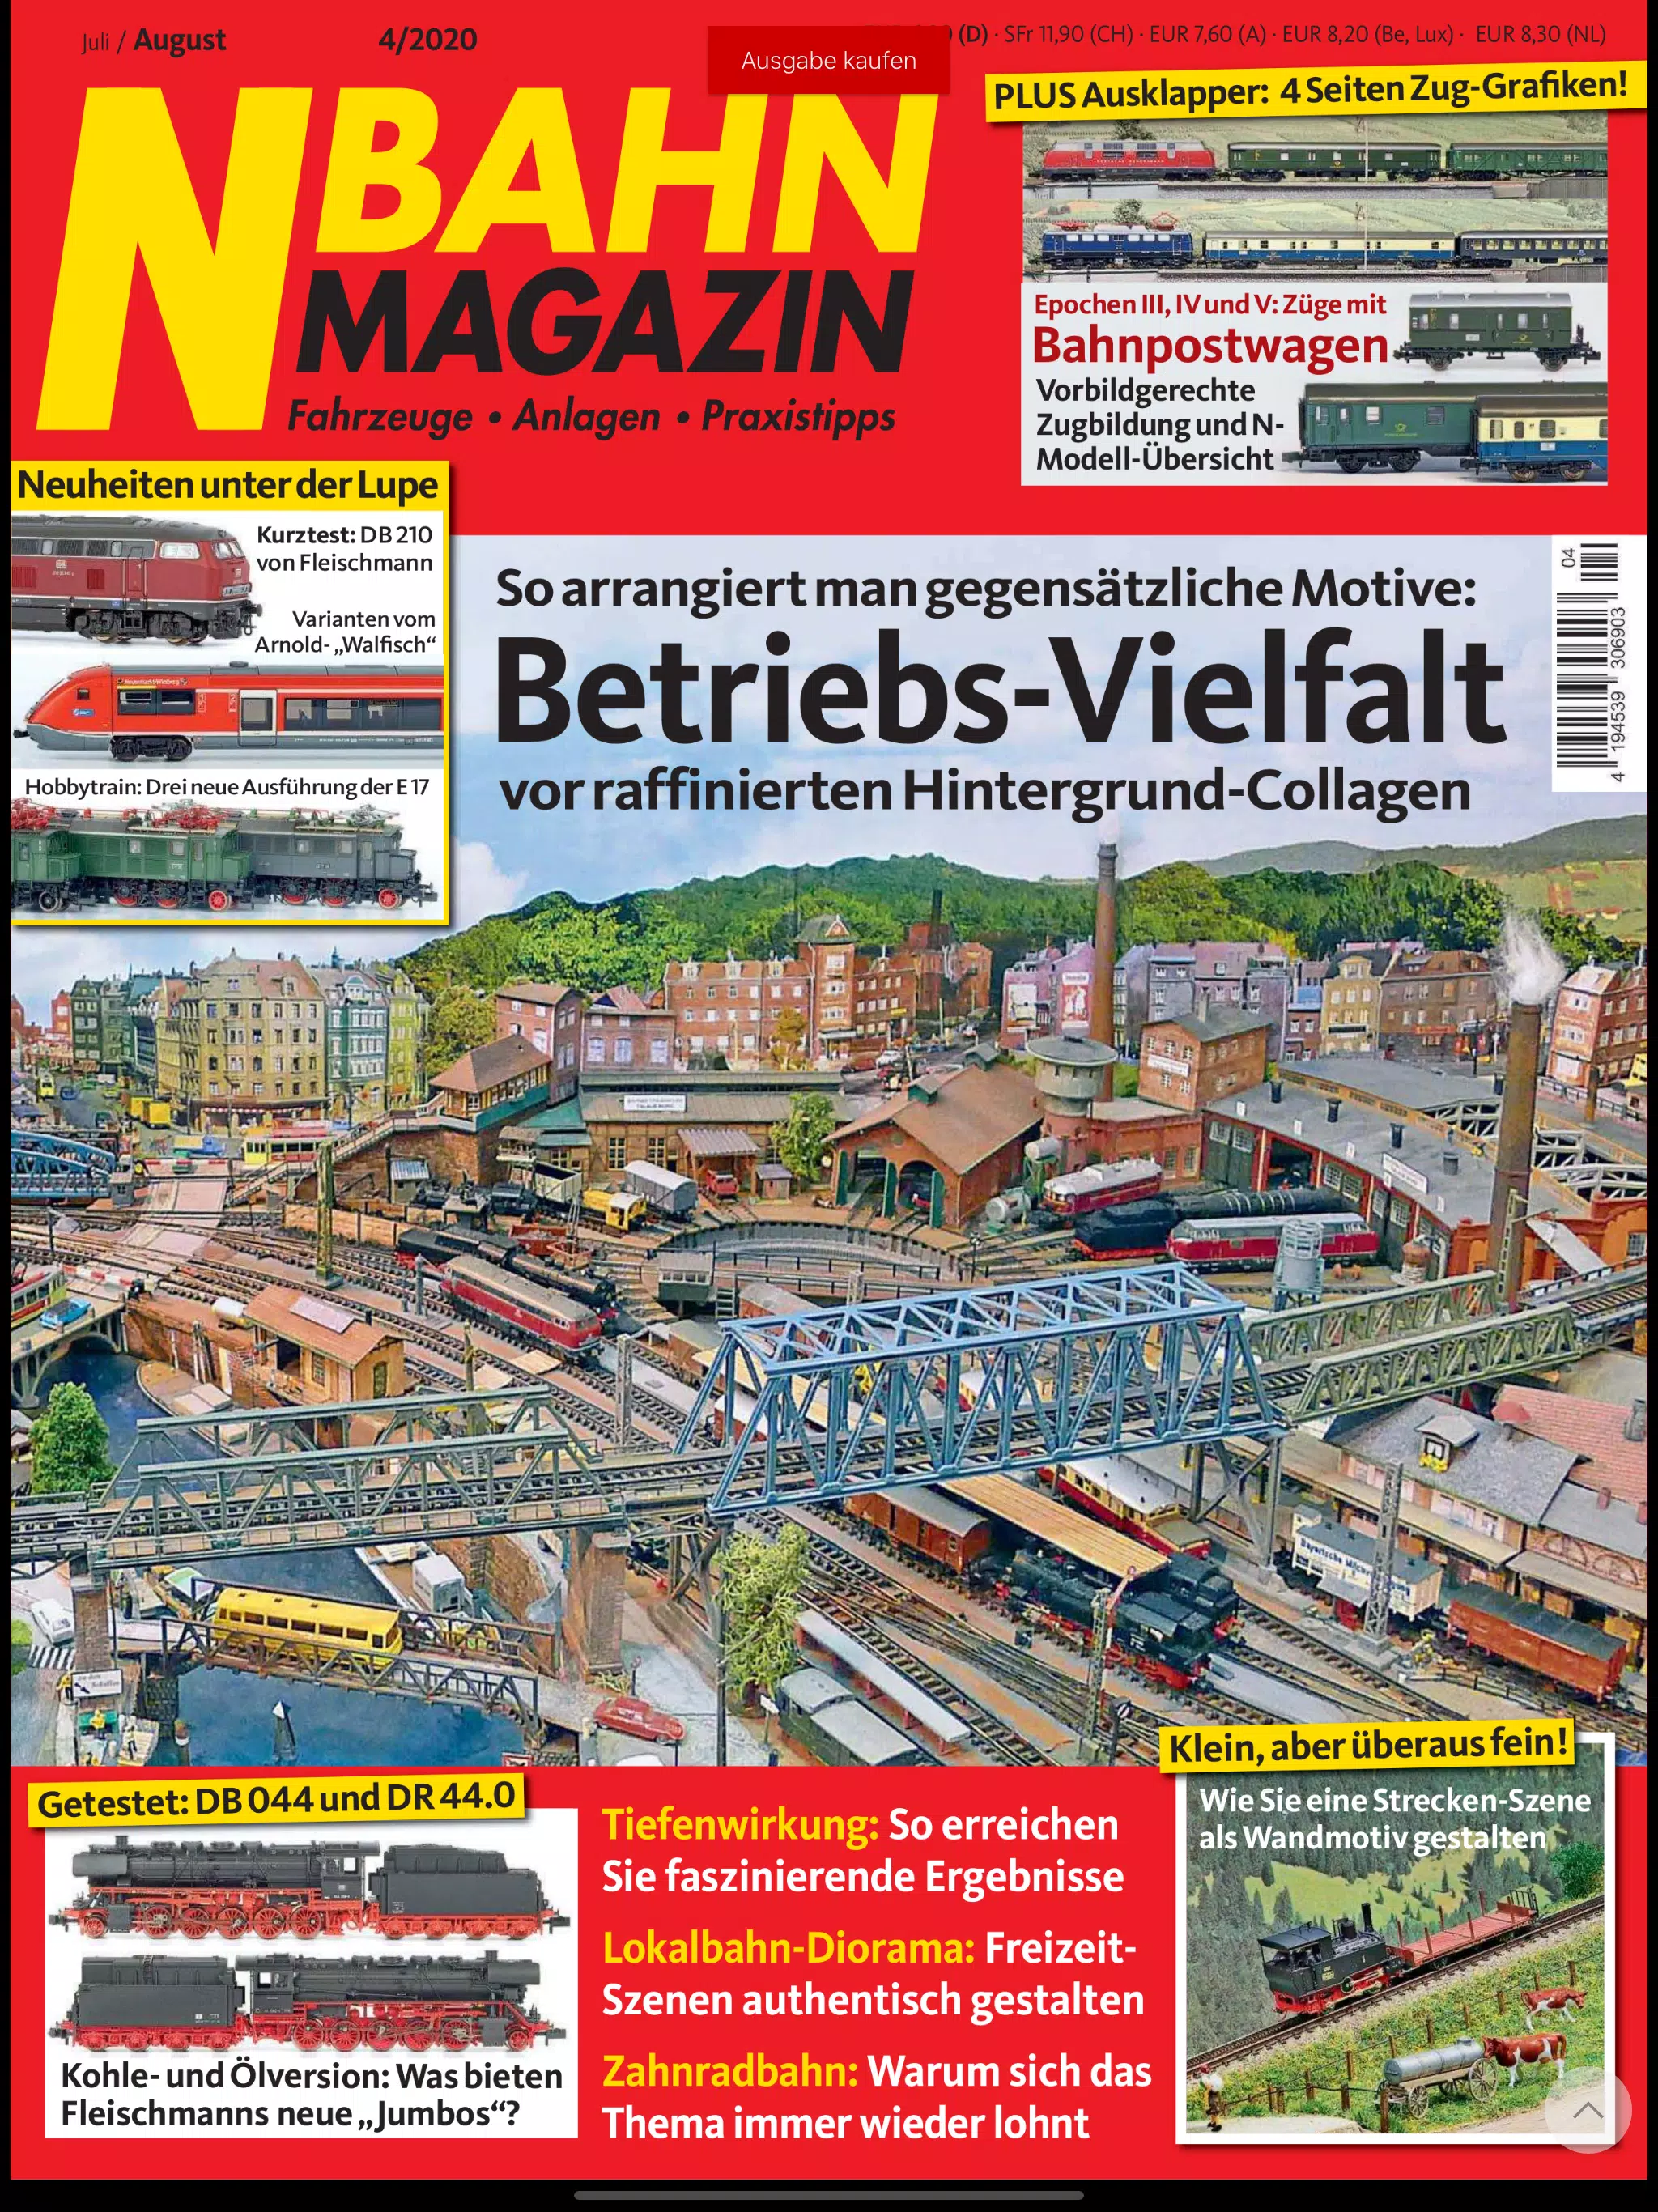 N-Bahn Magazin for Android - APK Download